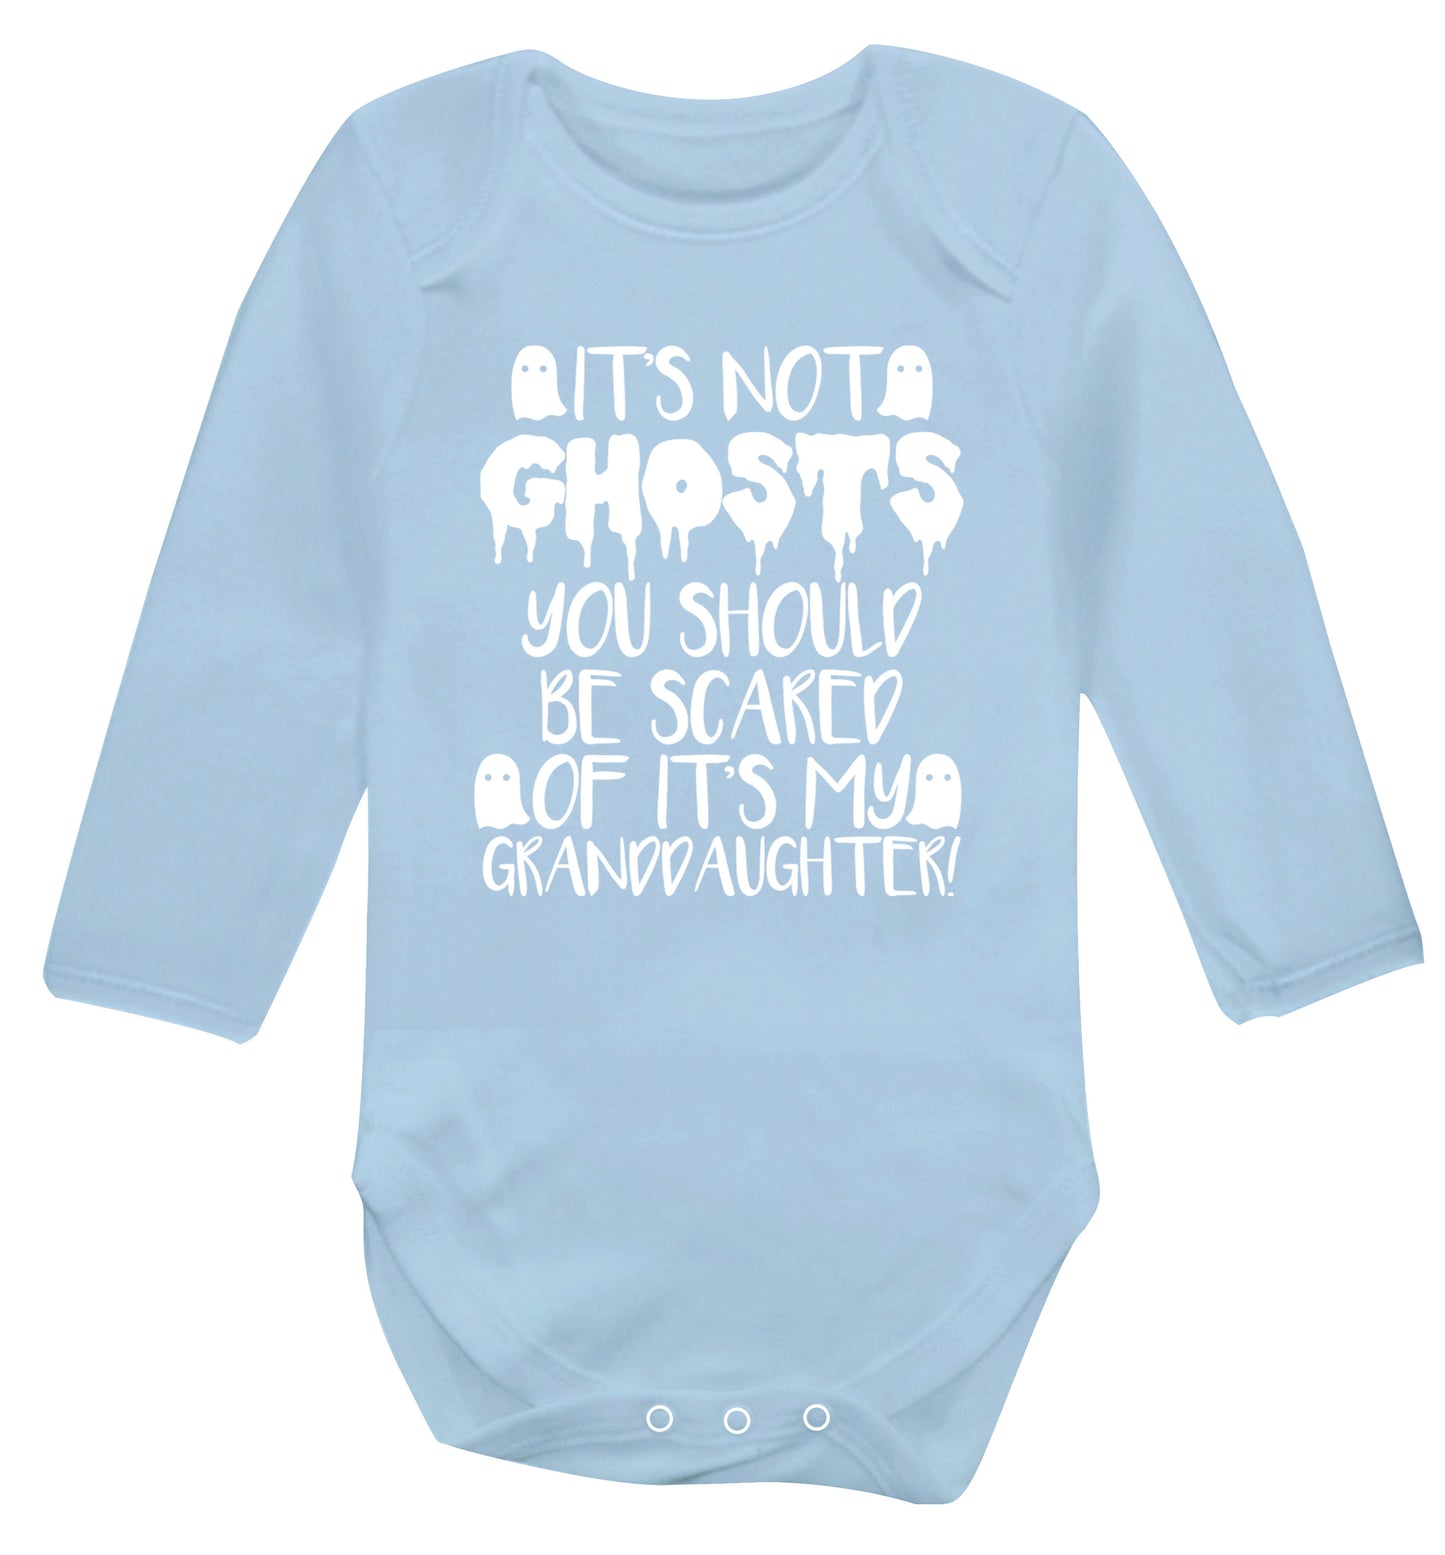 It's not ghosts you should be scared of it's my granddaughter! Baby Vest long sleeved pale blue 6-12 months